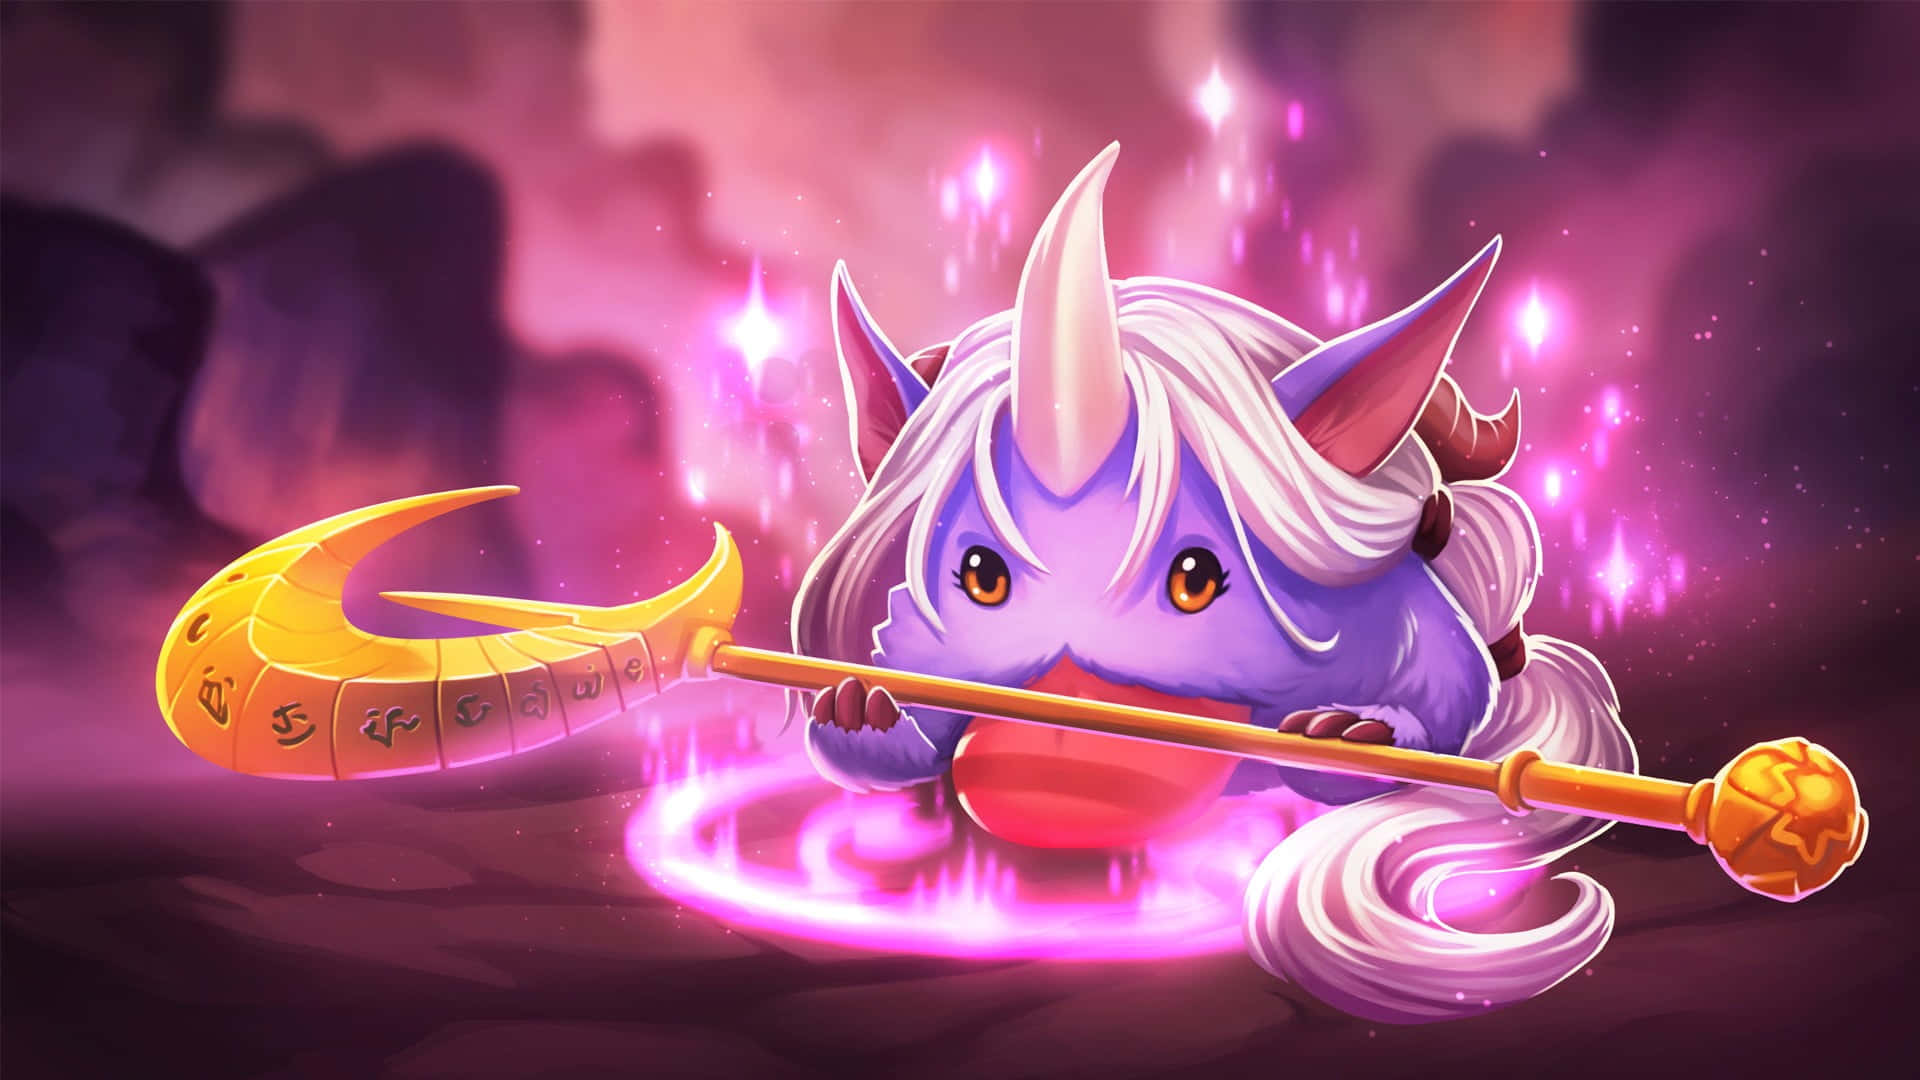 A Purple Dragon With A Sword And A Glowing Light Wallpaper